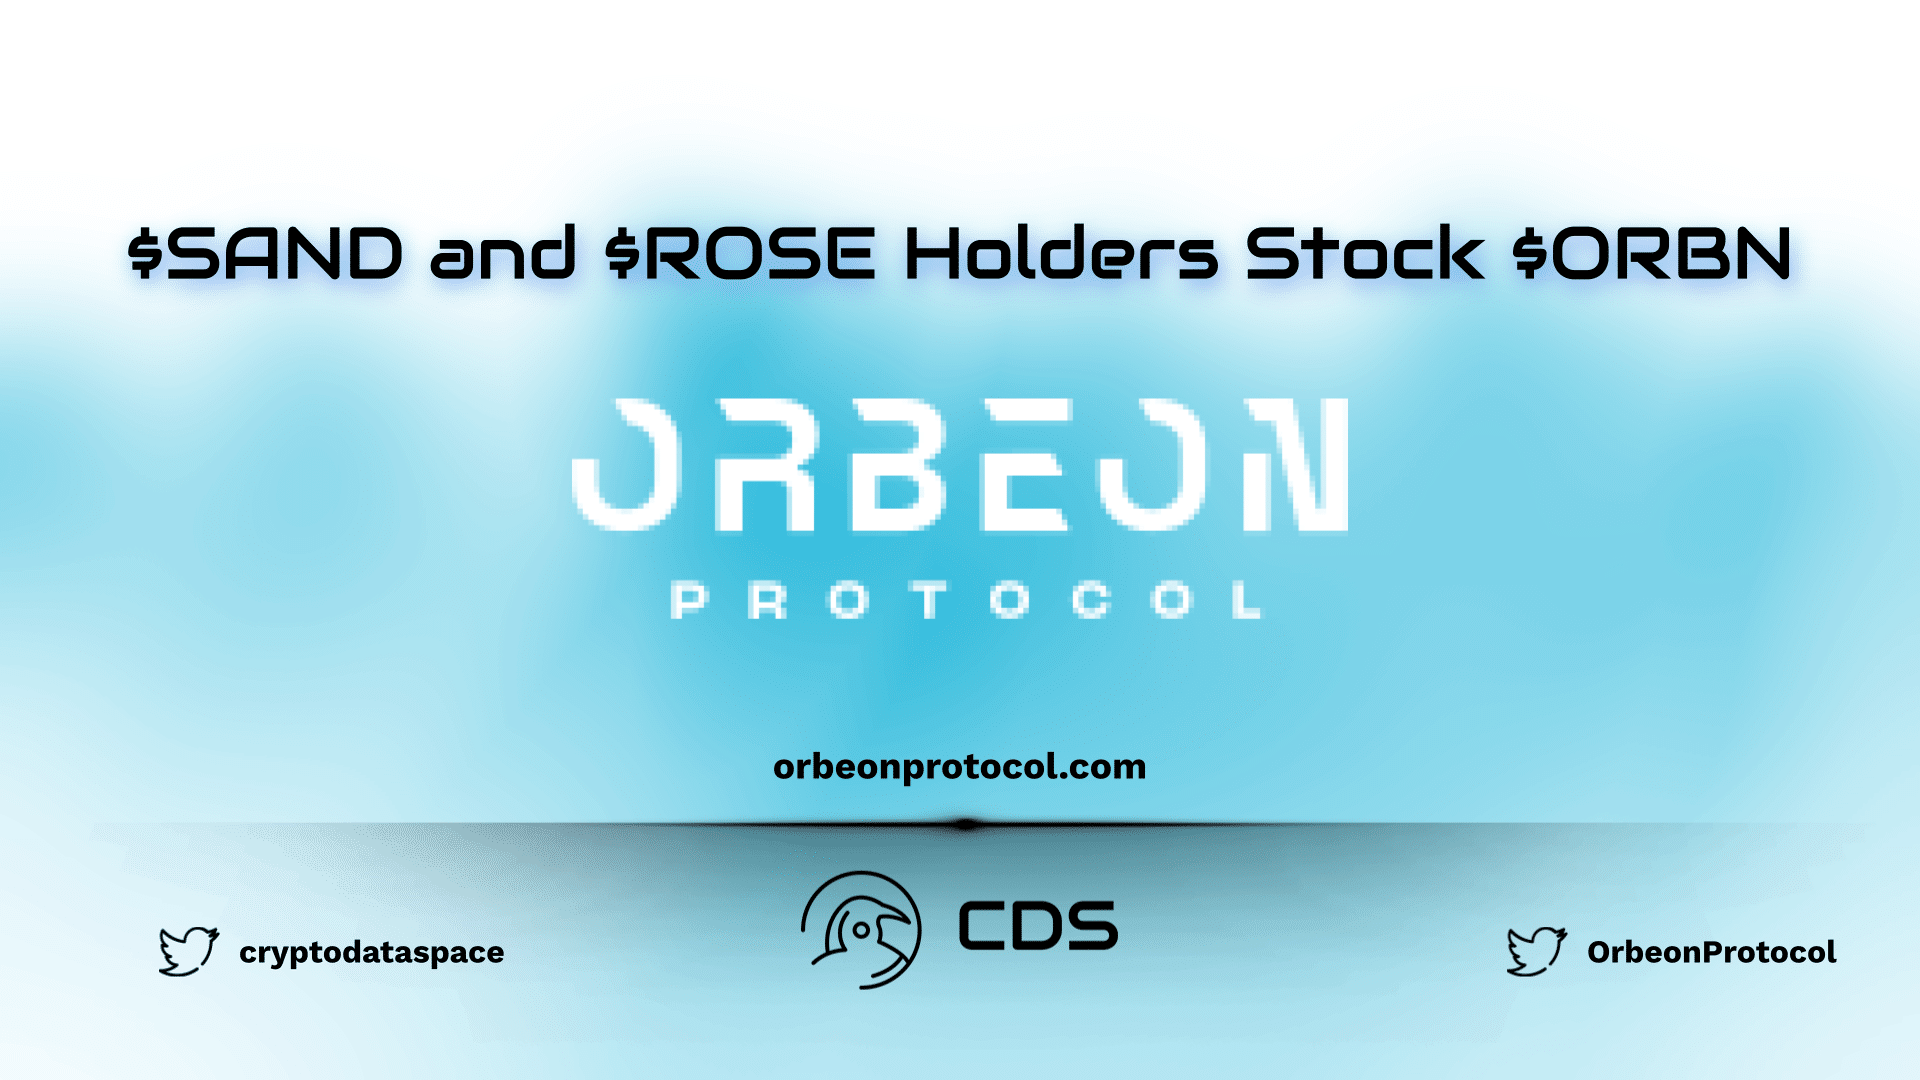 $SAND and $ROSE Holders Stock $ORBN